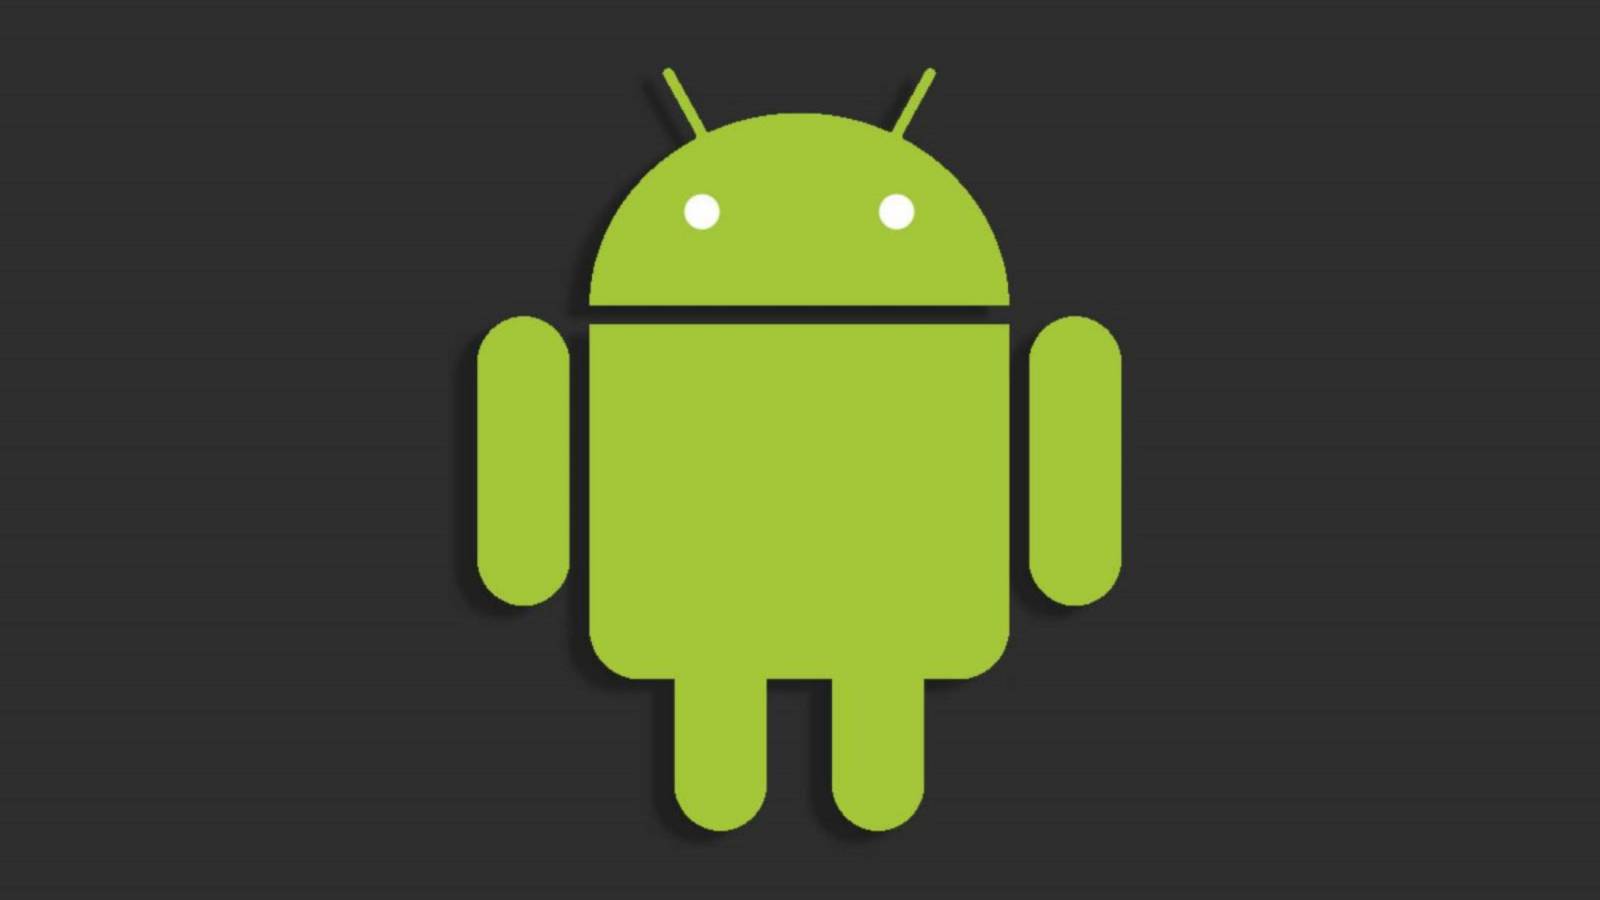 Android universal